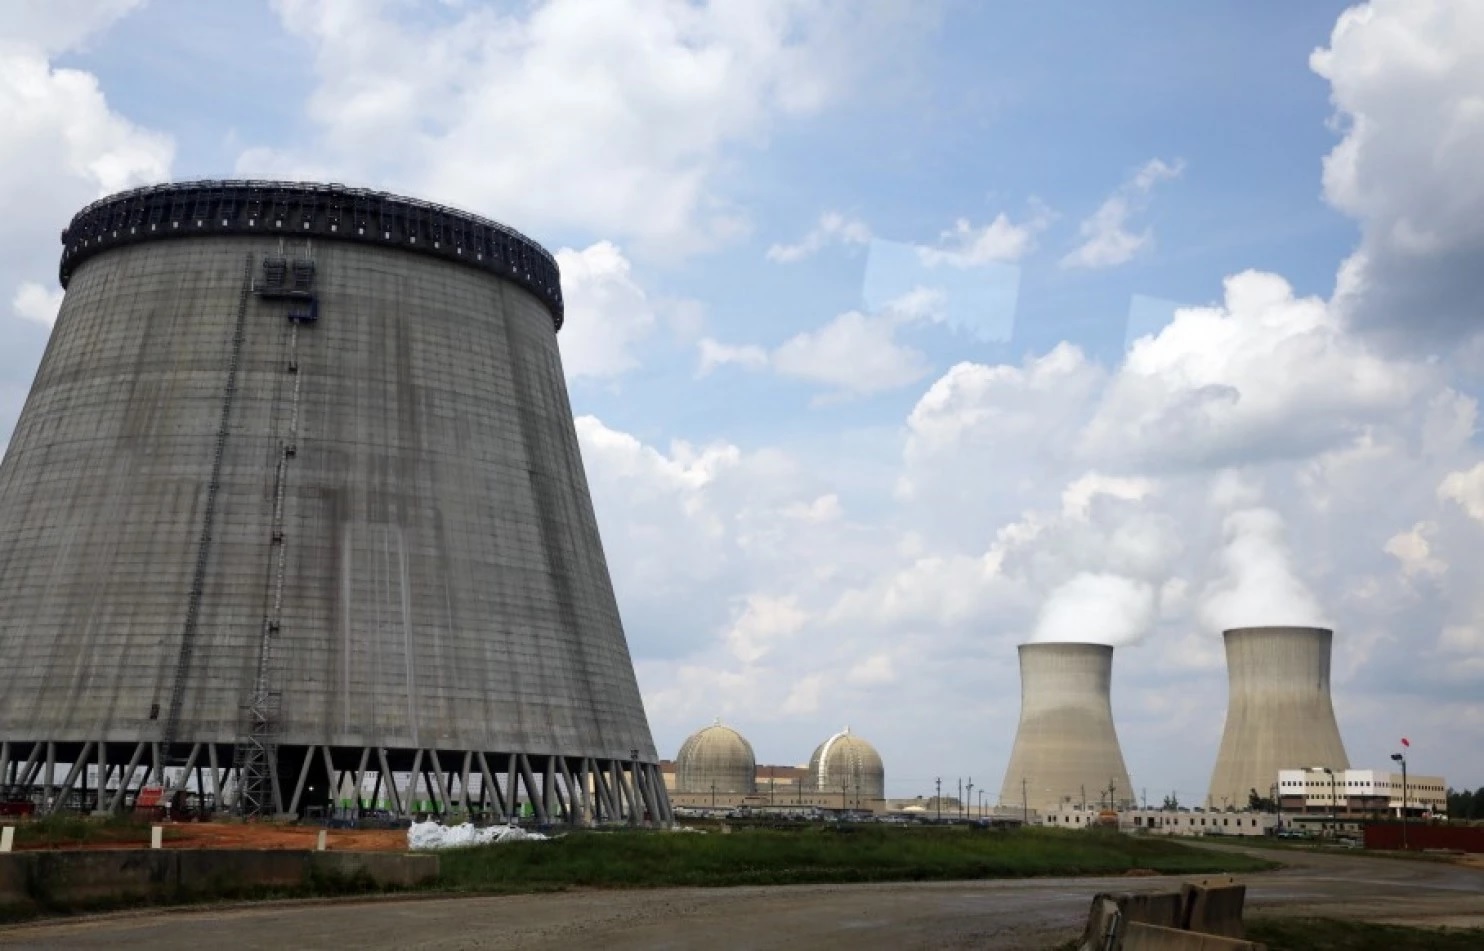 “NUCLEAR ENERGY AND RELATED LAWS IN INDIA – AN  ANALYSIS OF BRIEF AWARENESS SURVEY OF  COMMON PERCEPTIONS”